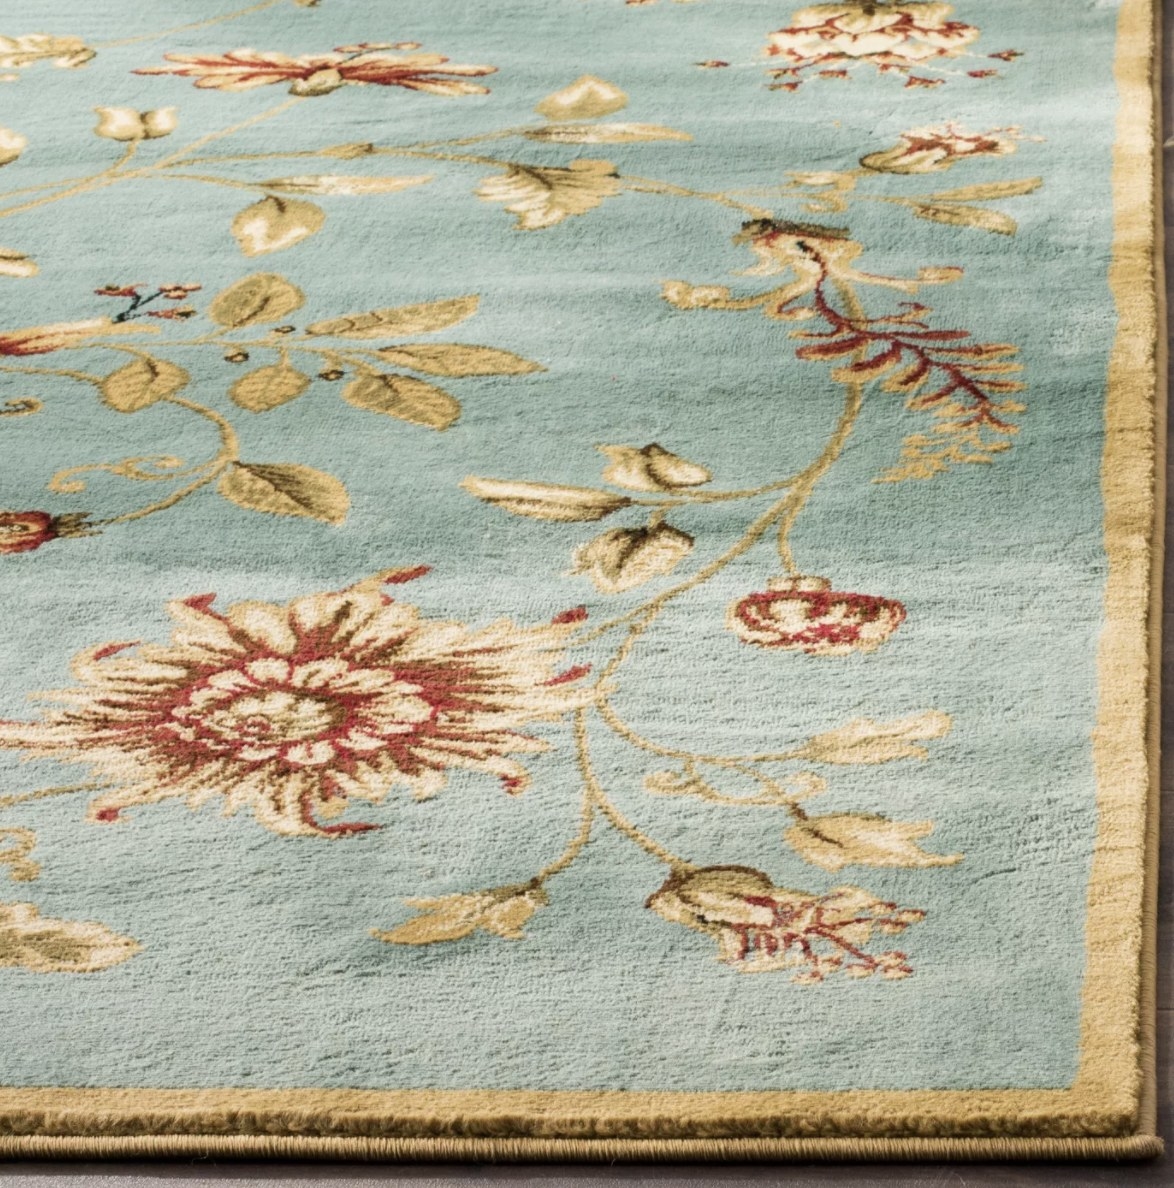 A closeup view of the light blue rug with floral designs